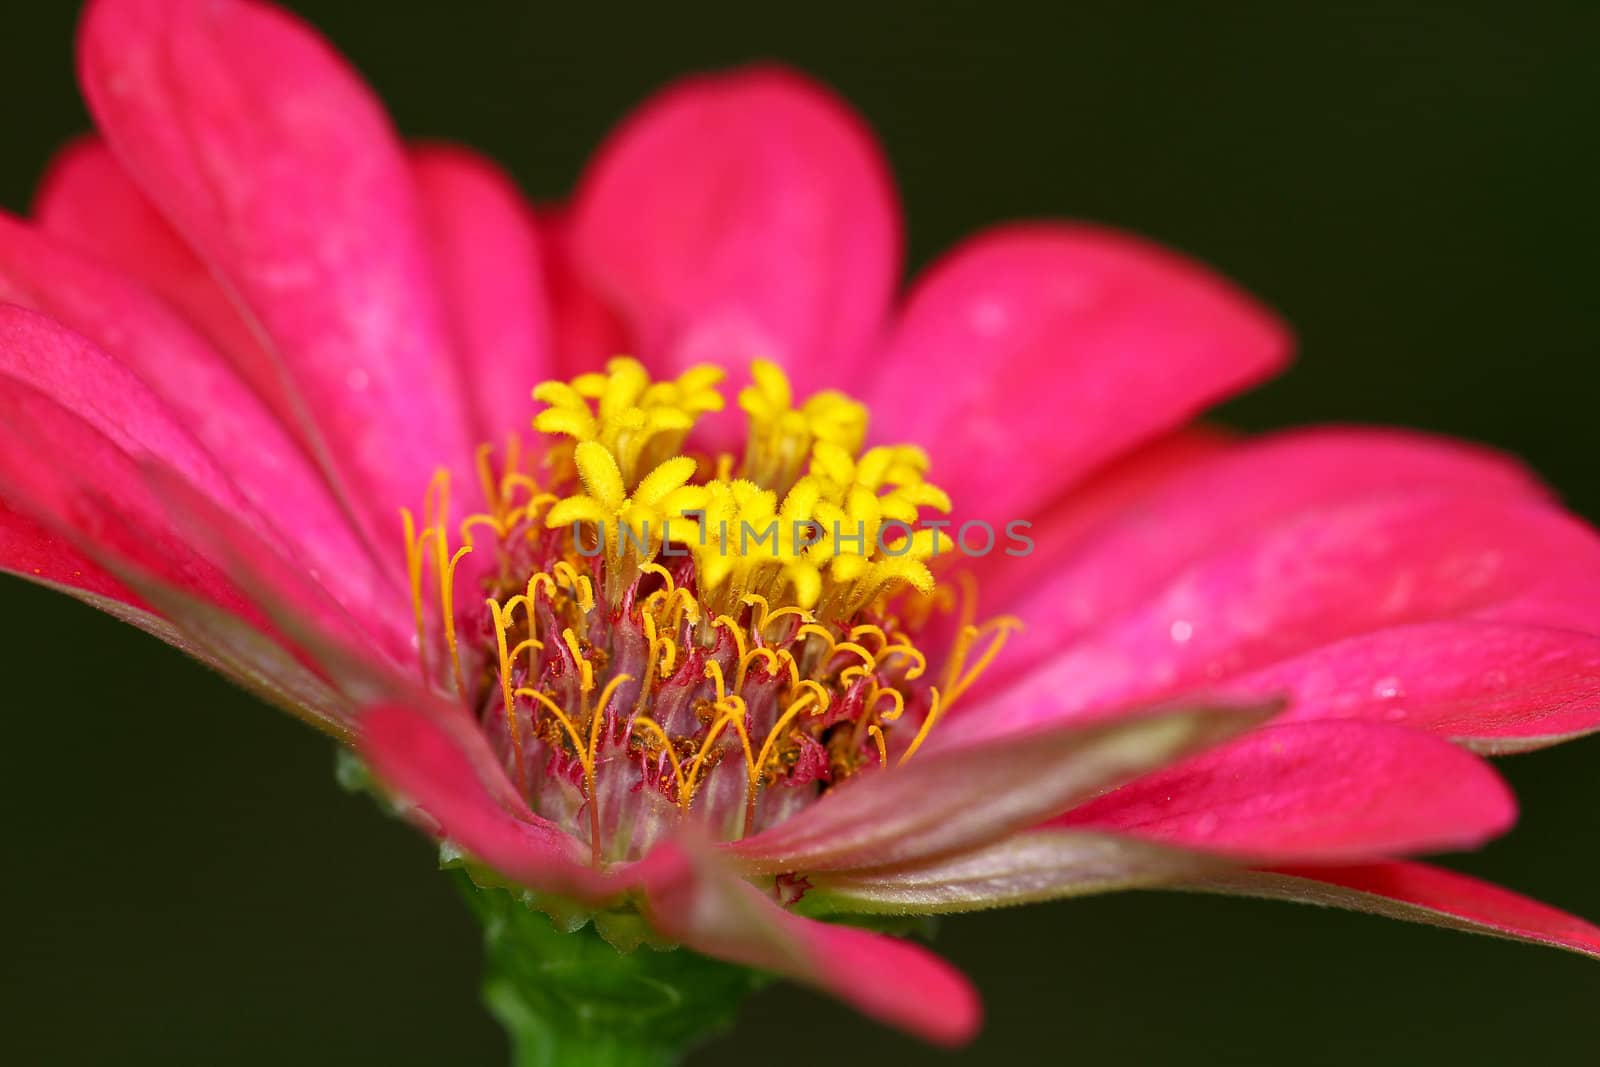 One pink daisy flower under the morning sun with dark background